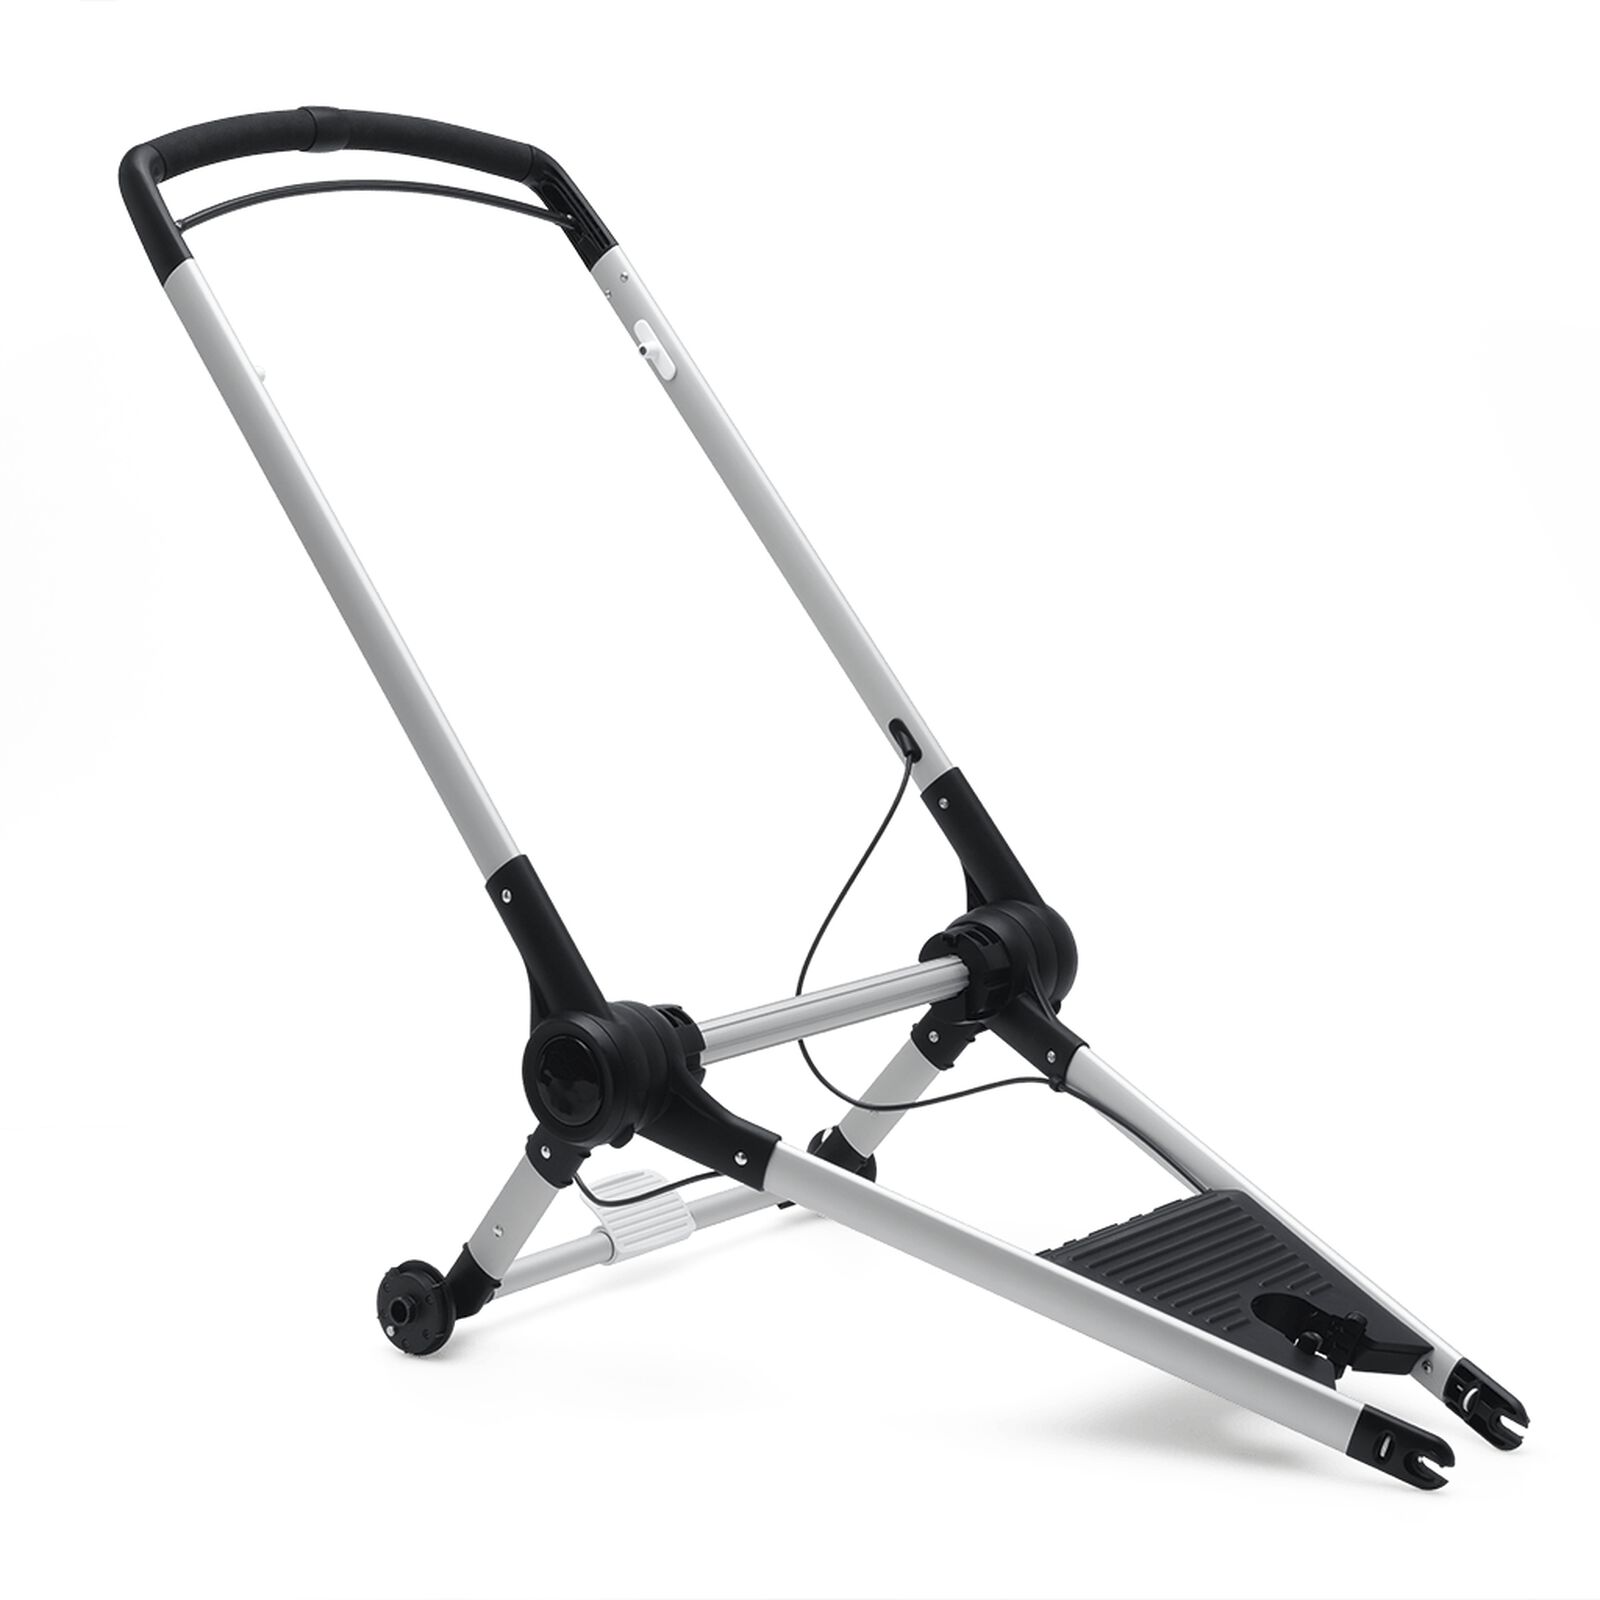 Bugaboo Runner chassis - View 1